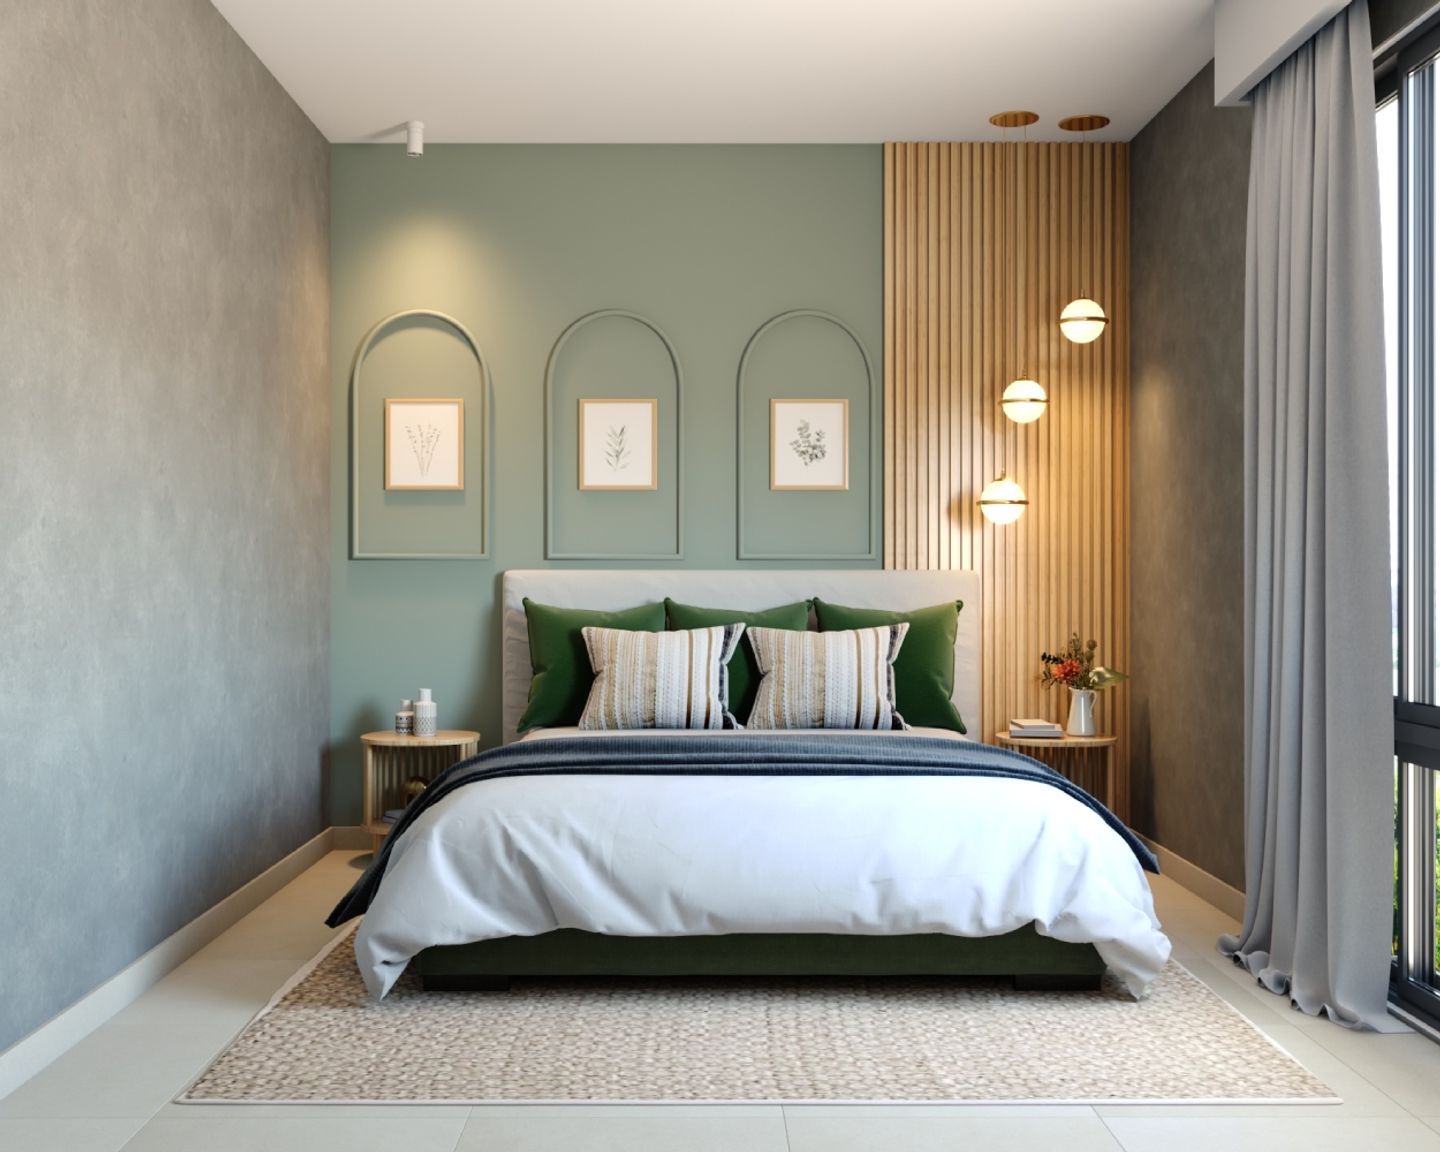 Modern Master Bedroom Design With Light Green Accent Wall And Fluted Panels - Livspace